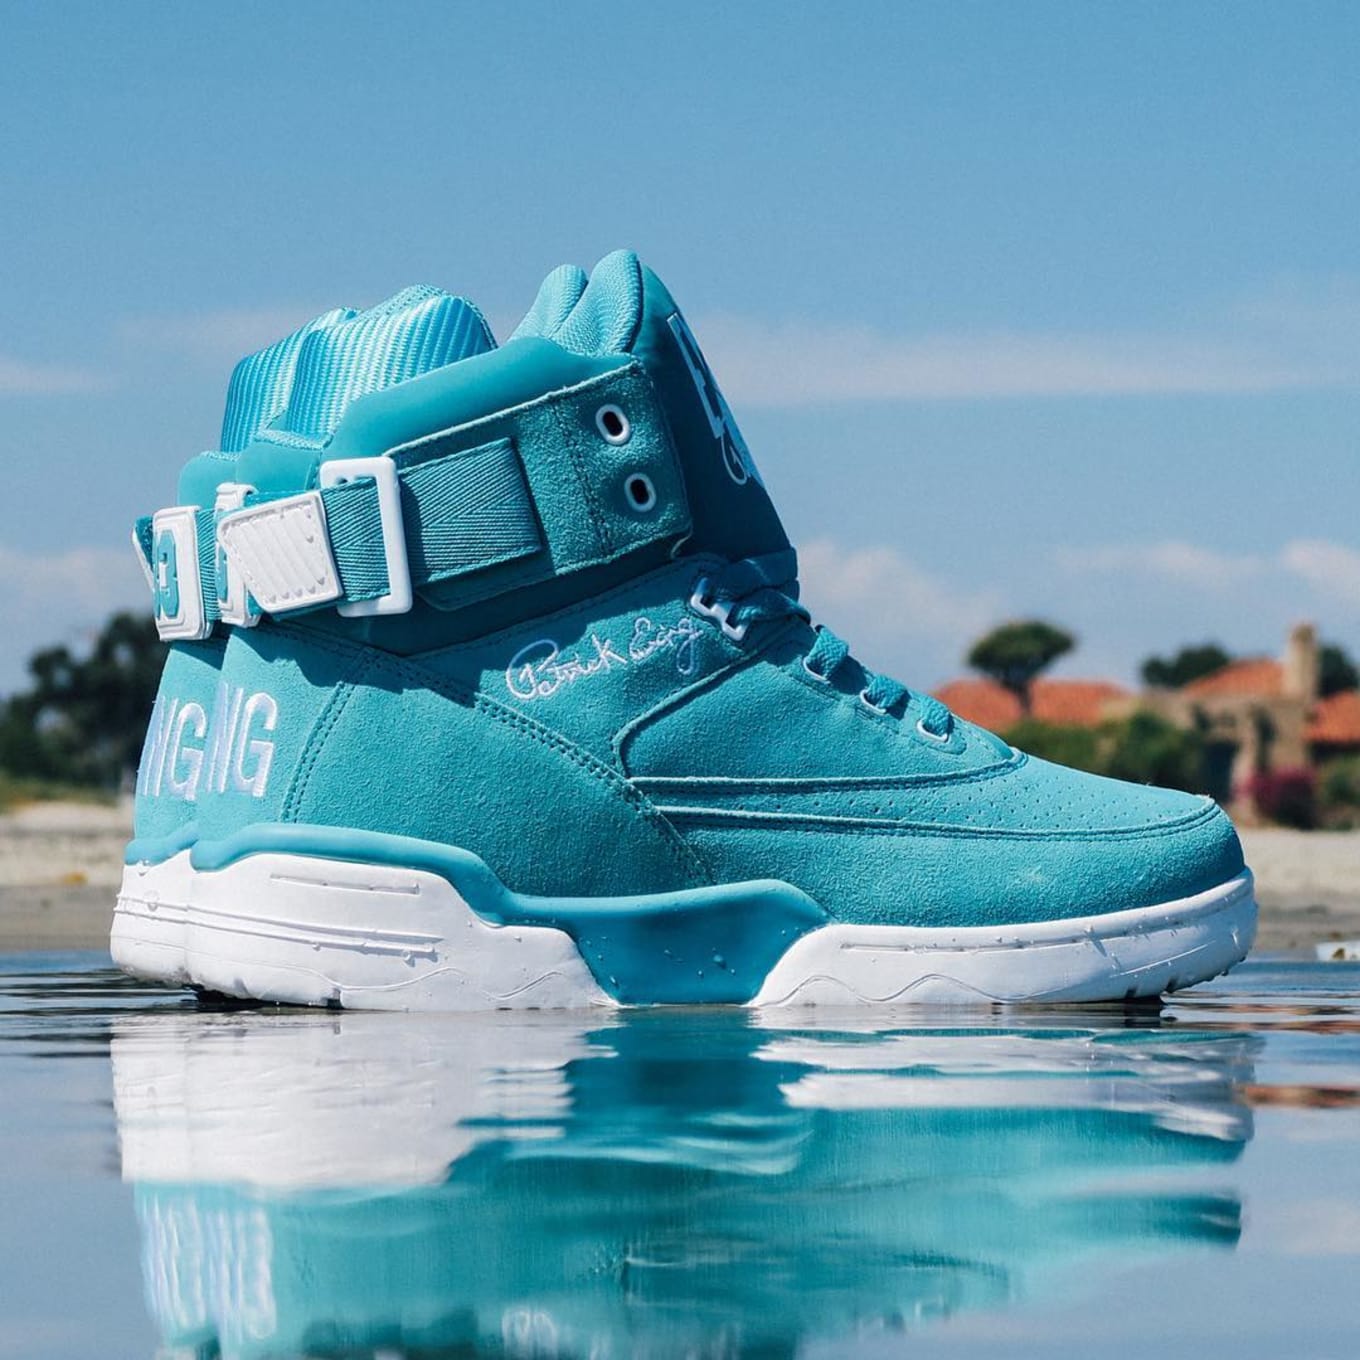 Ewing 33 Hi Turquoise Suede Release Date Side | Sole Collector